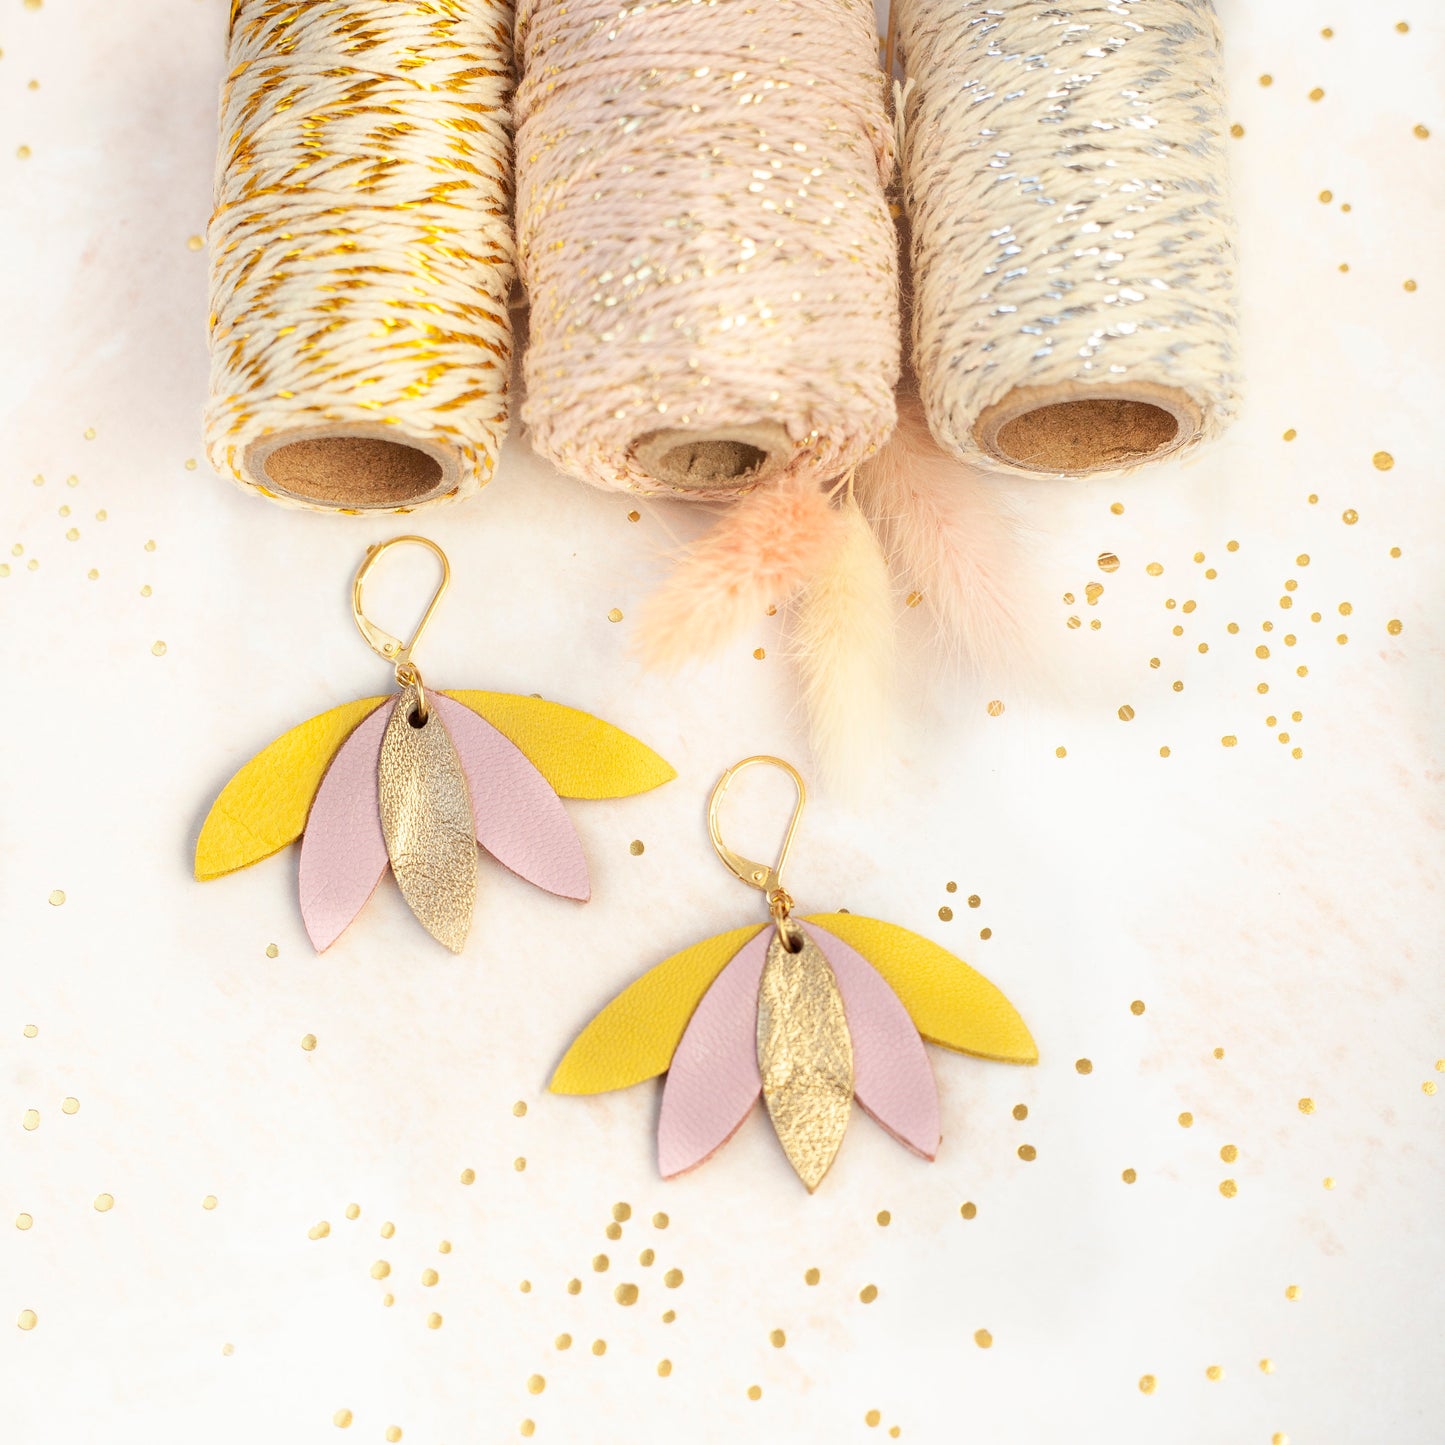 Palmier earrings in yellow, pink and gold leather